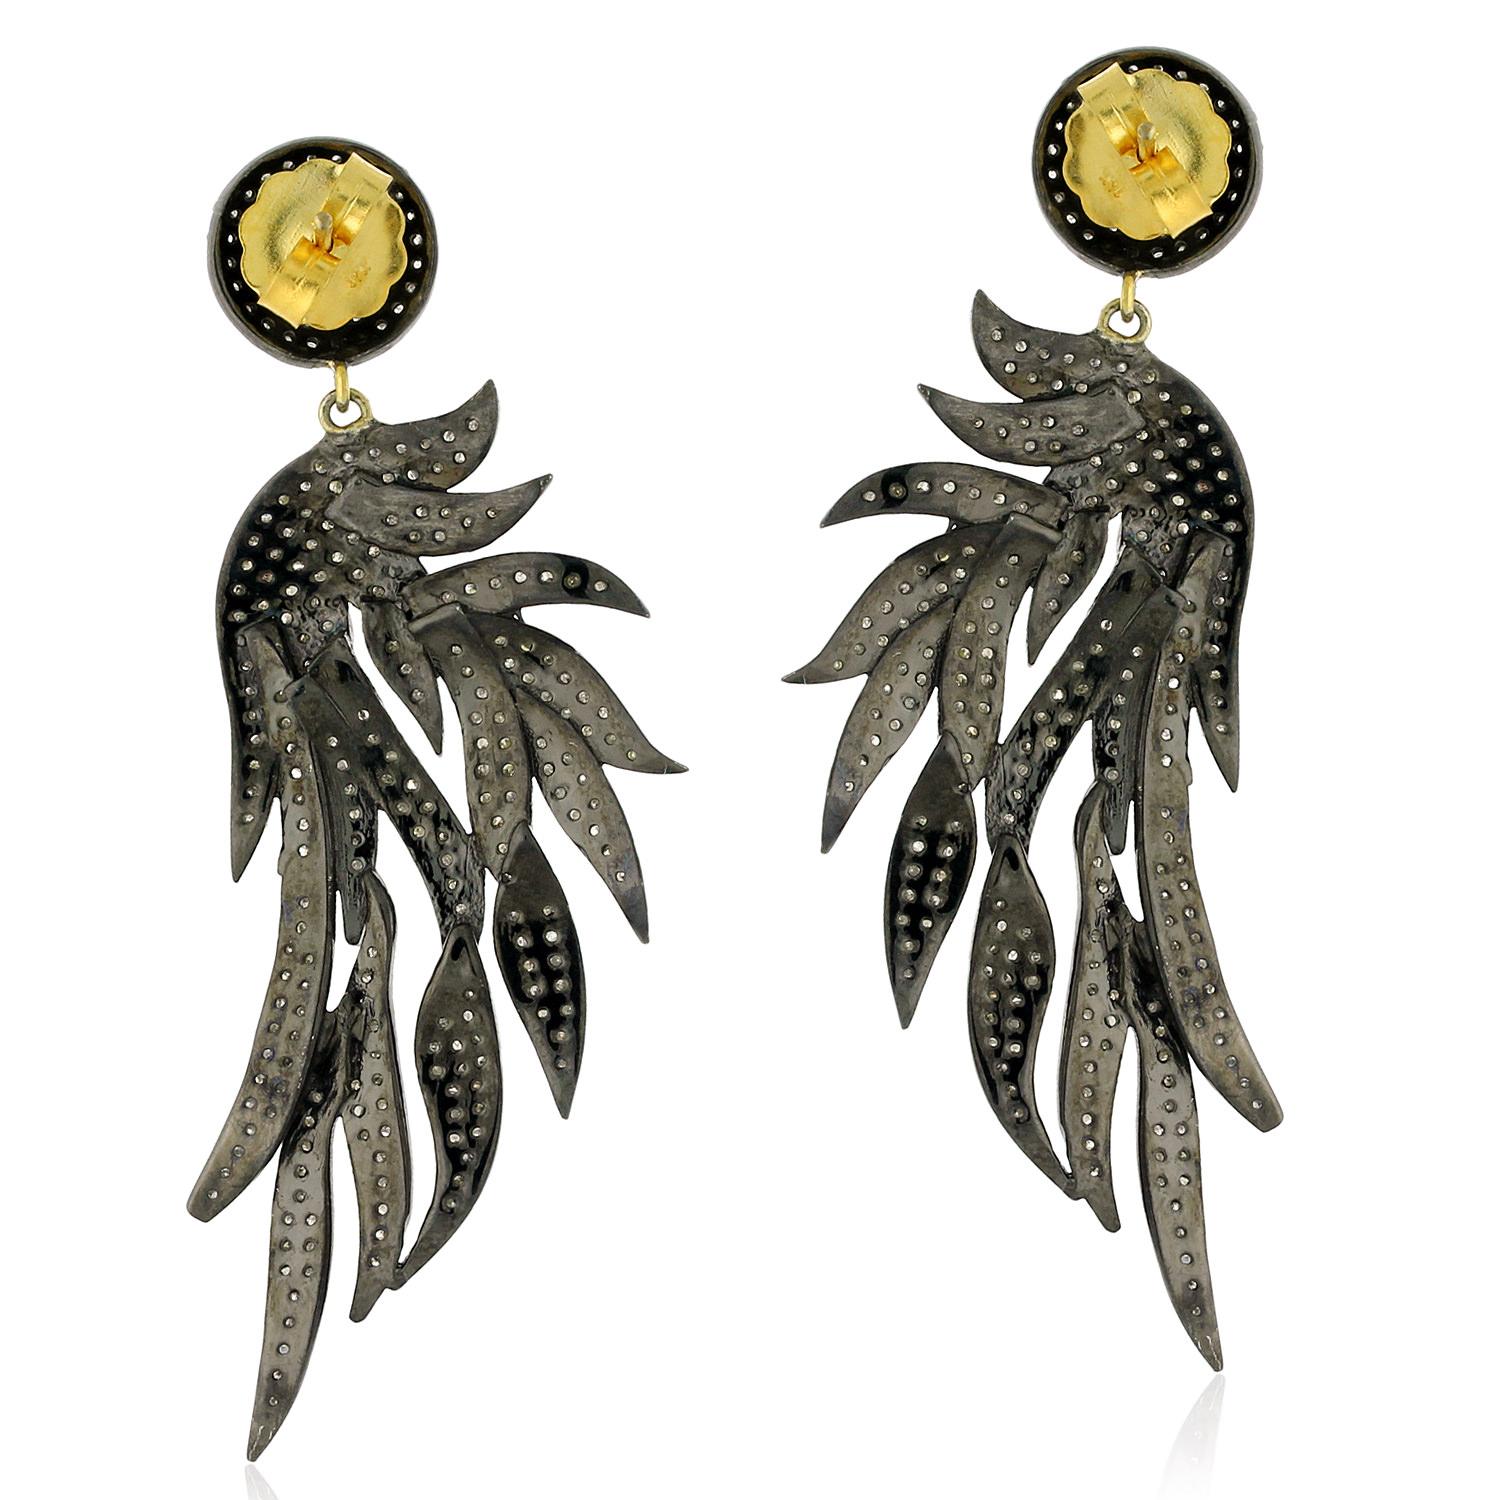 These beautiful flame shaped earrings are made from 14k gold and silver, and feature pave diamonds for a dazzling finish. The unique flame design adds a touch of drama and intensity to any outfit. The diamonds catch the light with every movement,